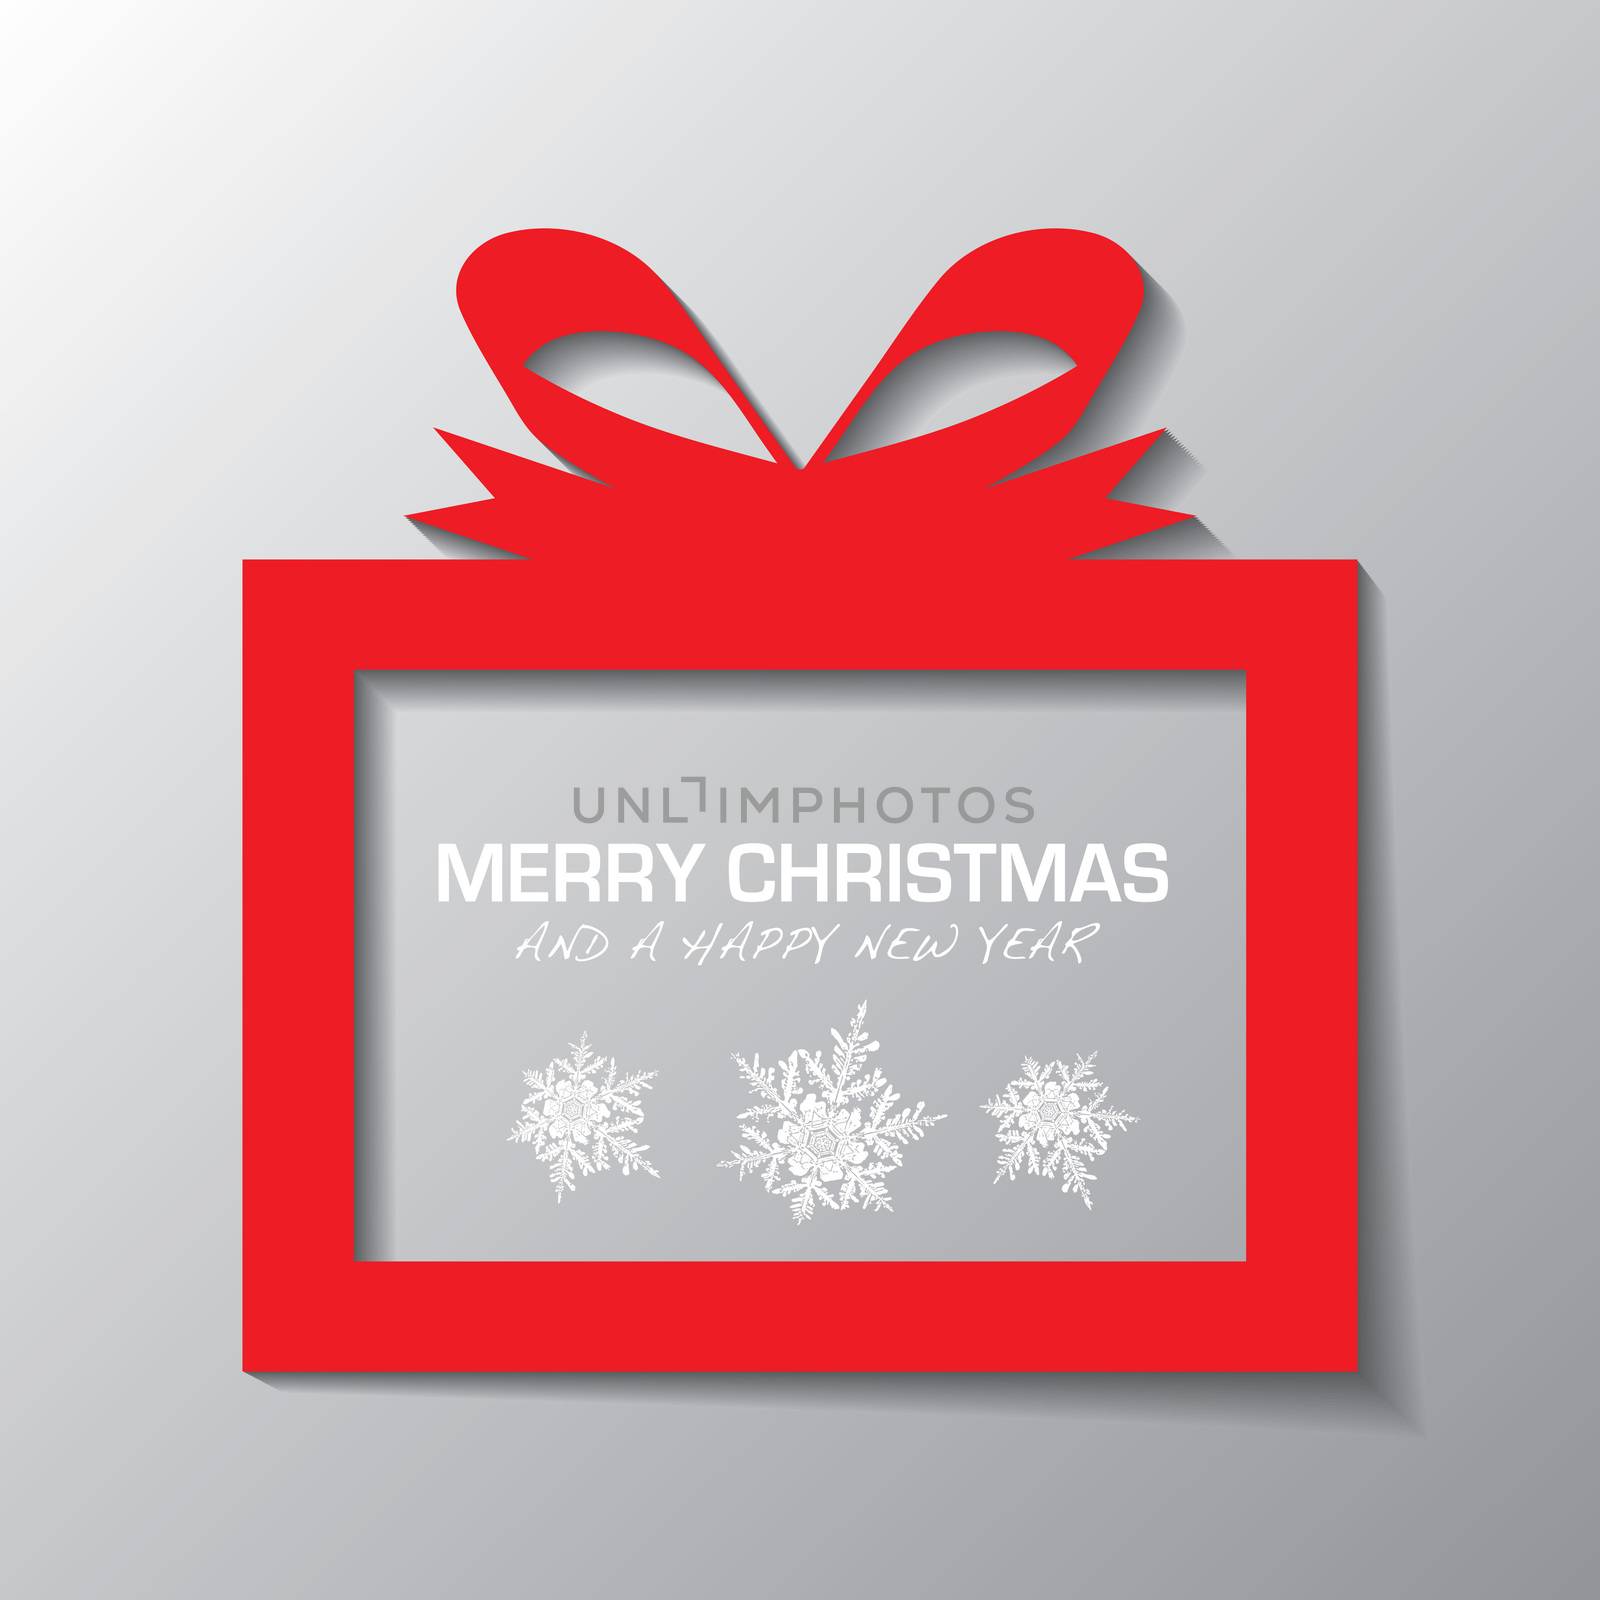 Red illustrated present icon with holiday message and snow flakes